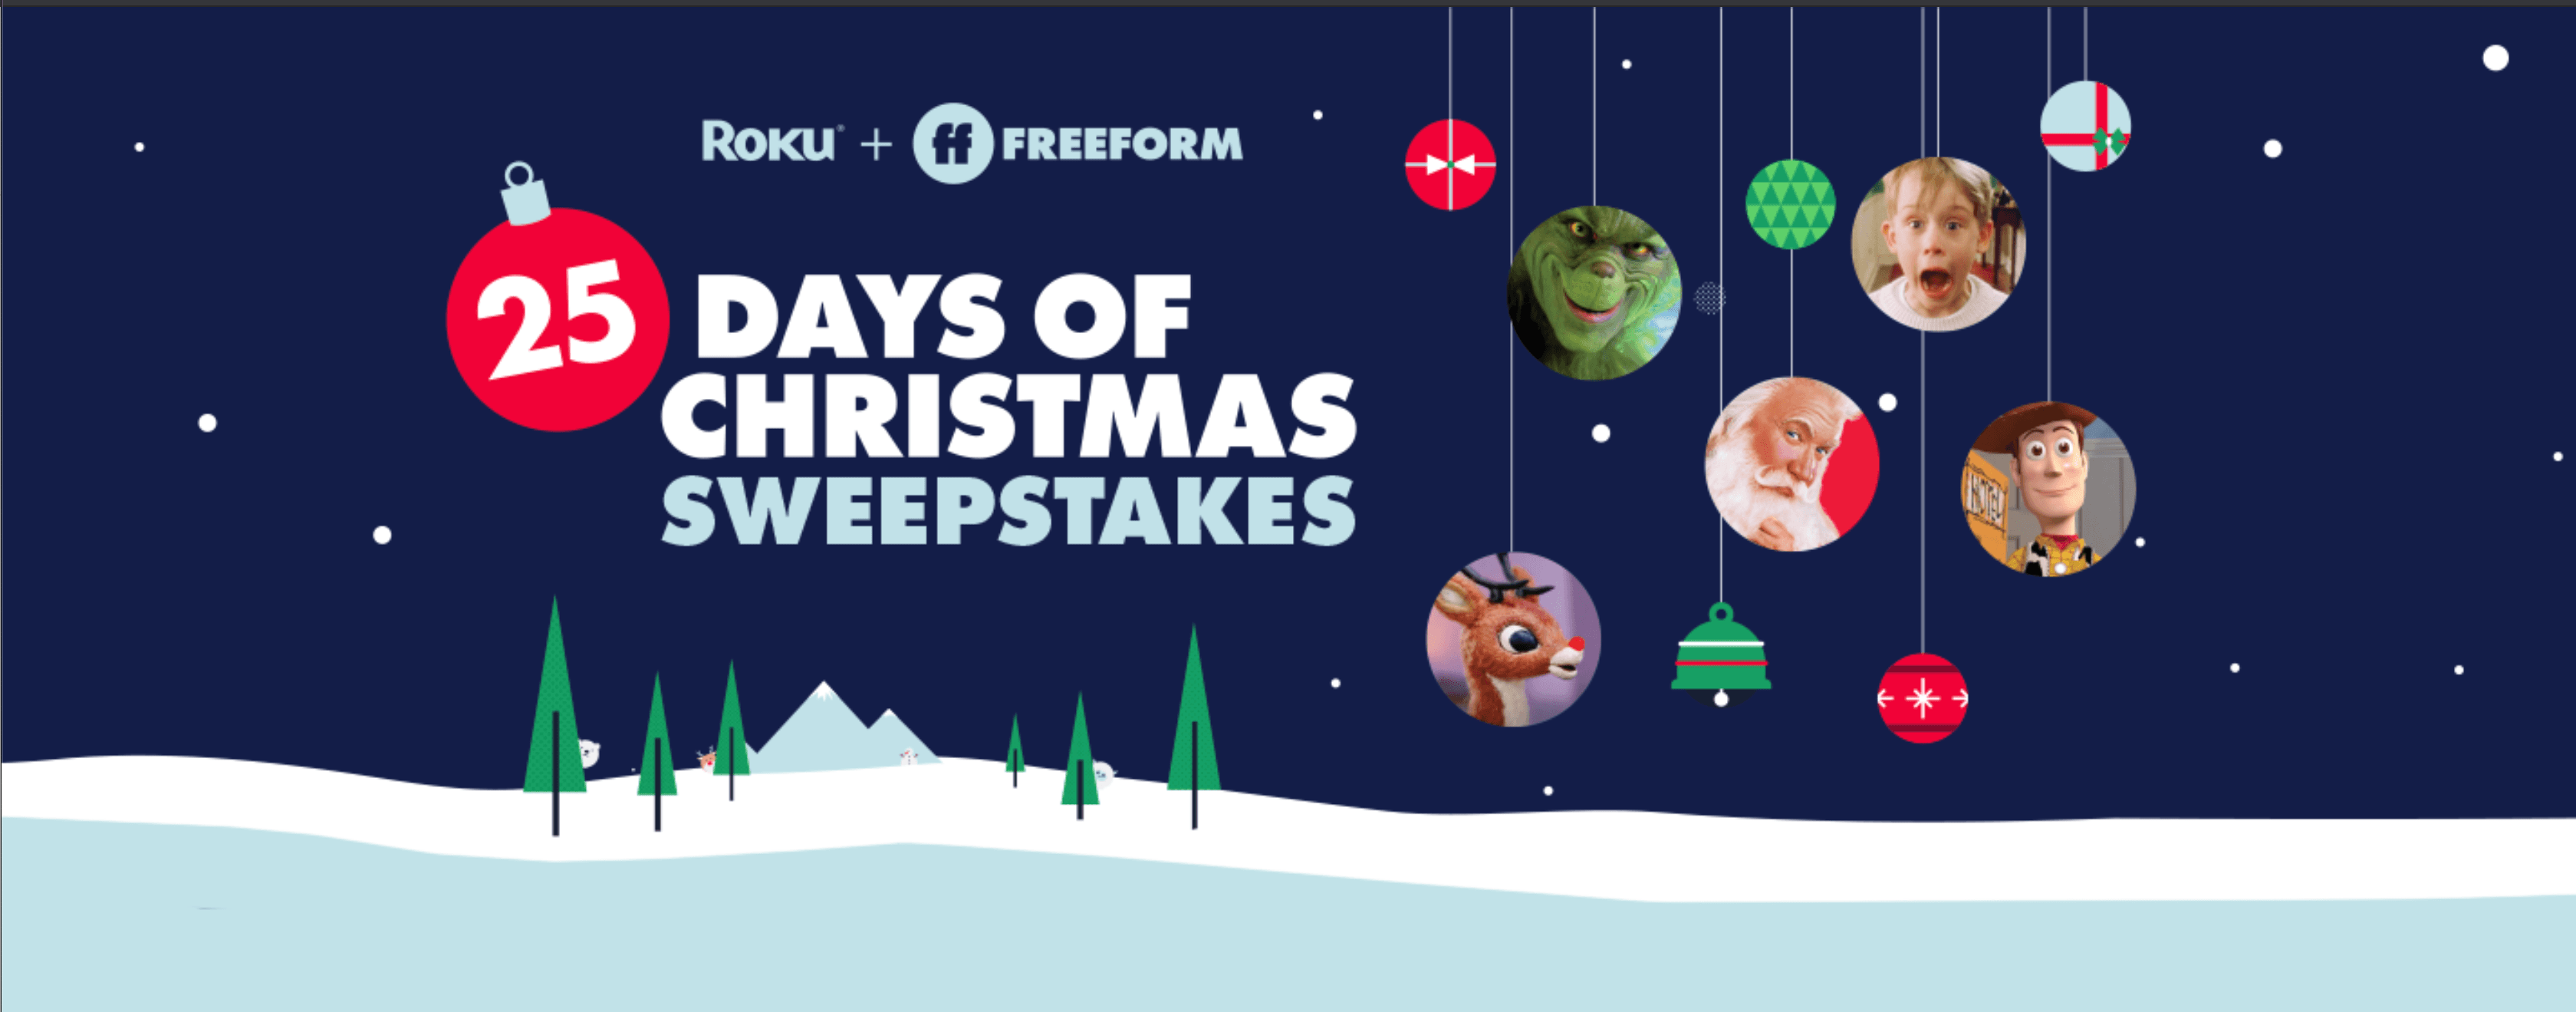 Enter to Win a 55″ Roku TV in Freeform’s 25 Days of Christmas Sweepstakes